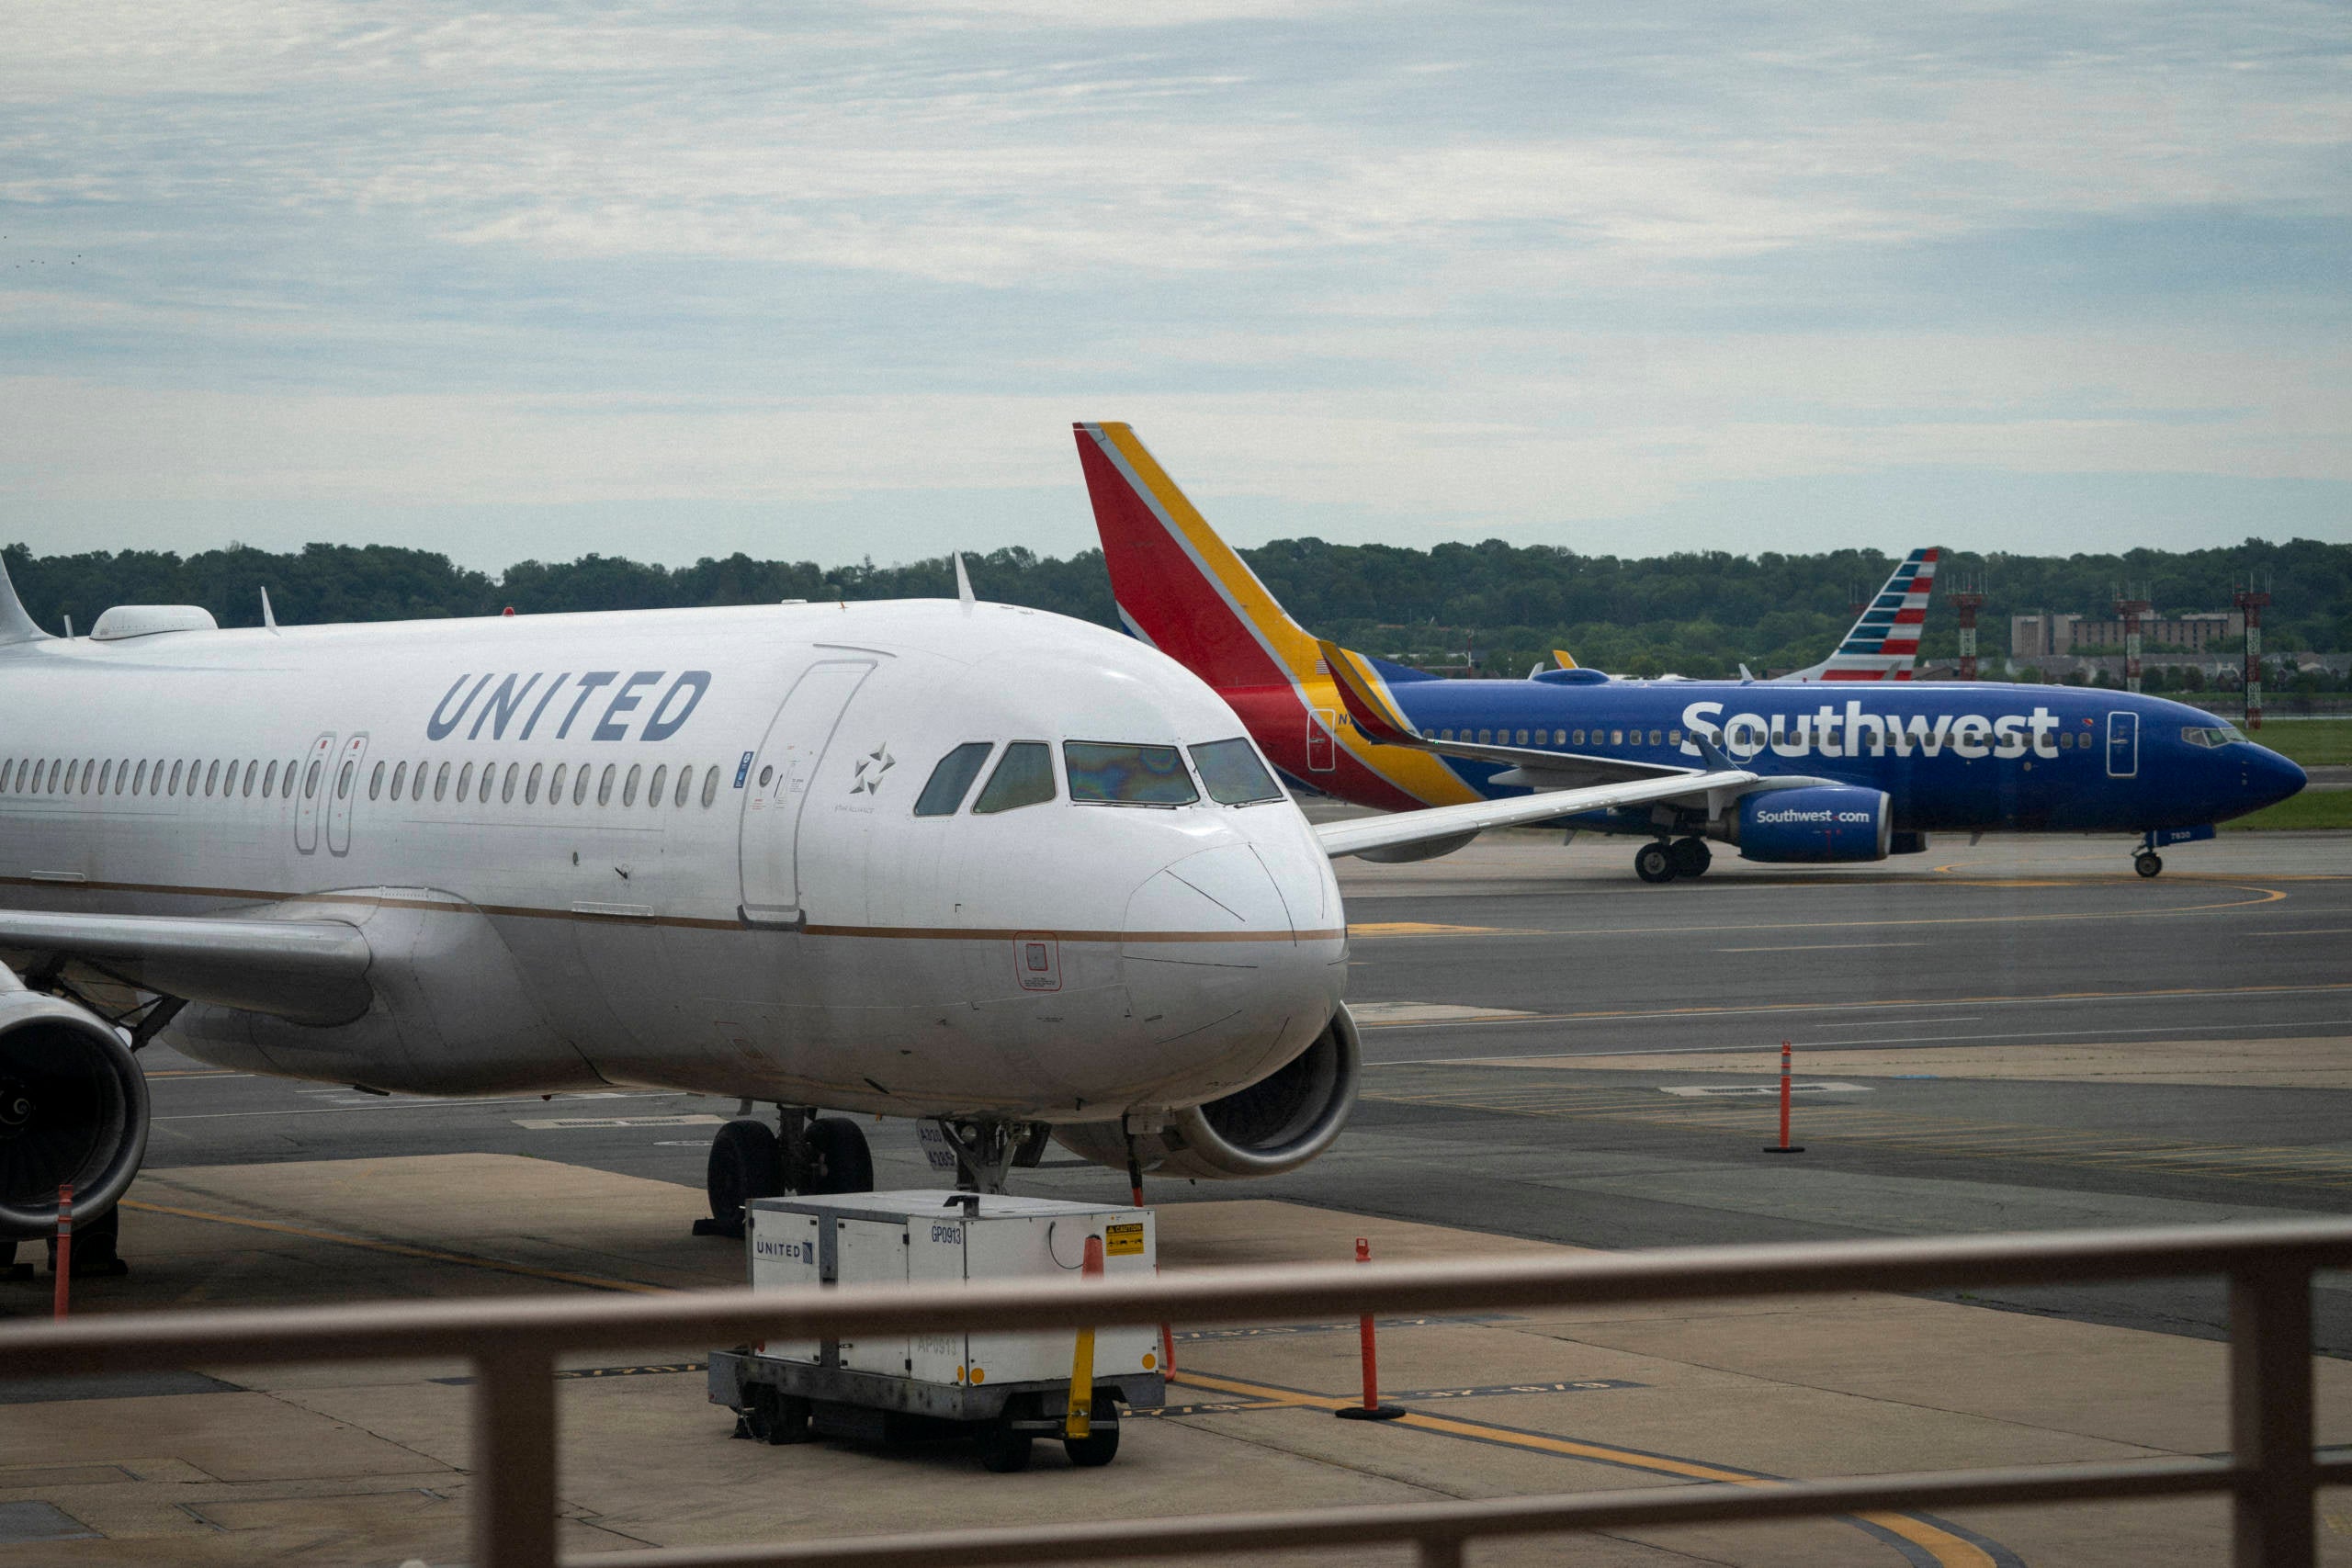 United and Southwest Planes